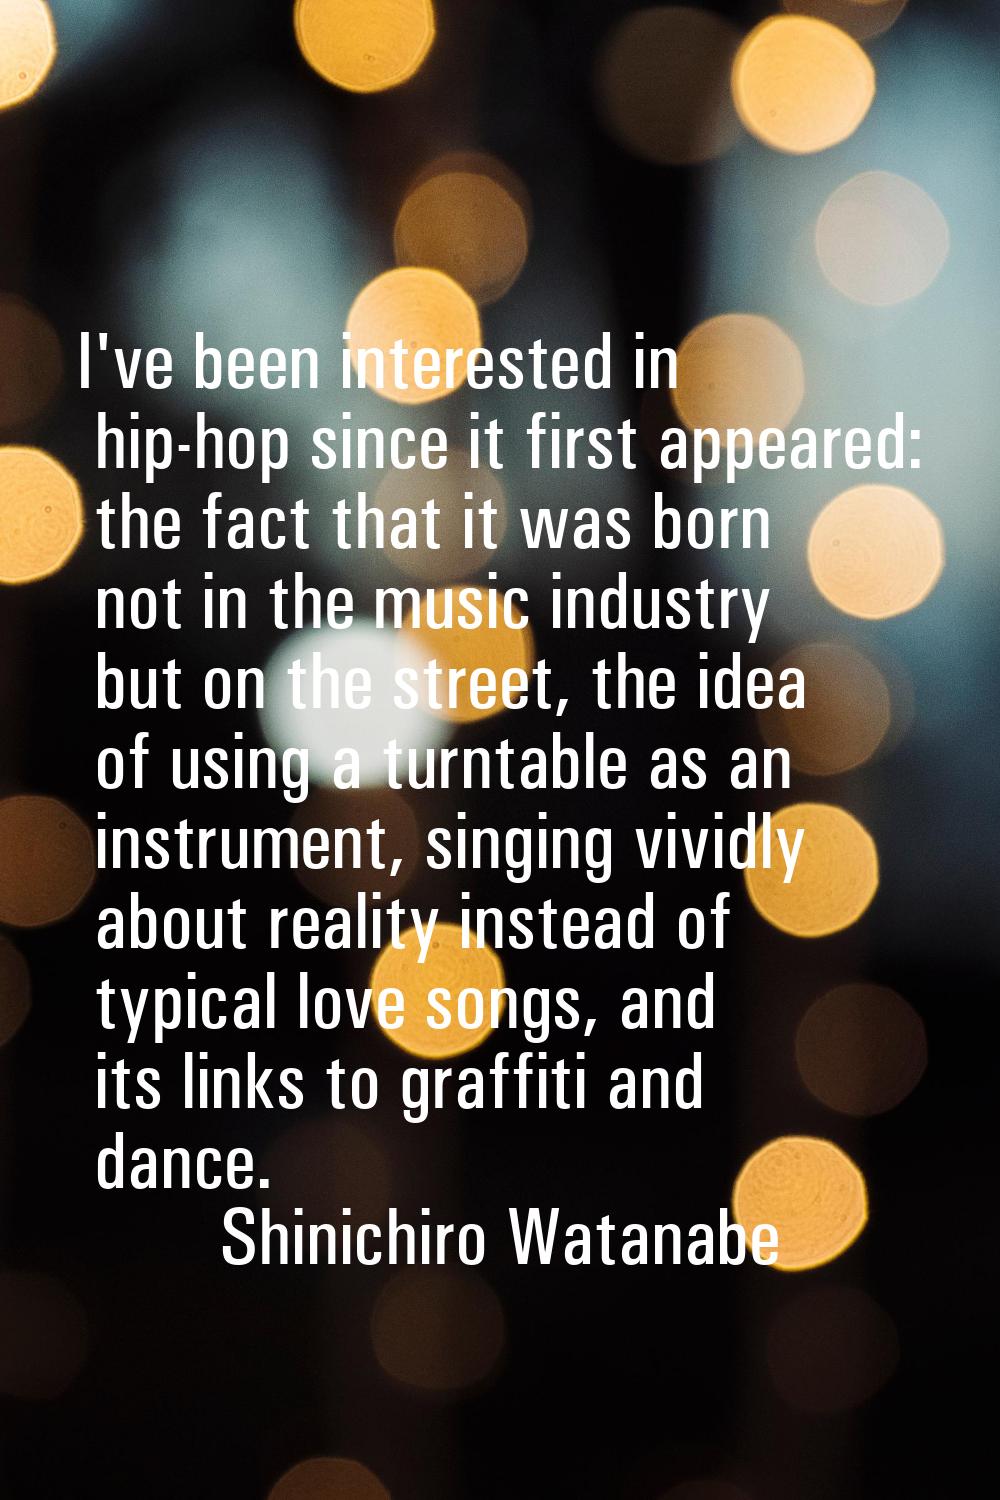 I've been interested in hip-hop since it first appeared: the fact that it was born not in the music